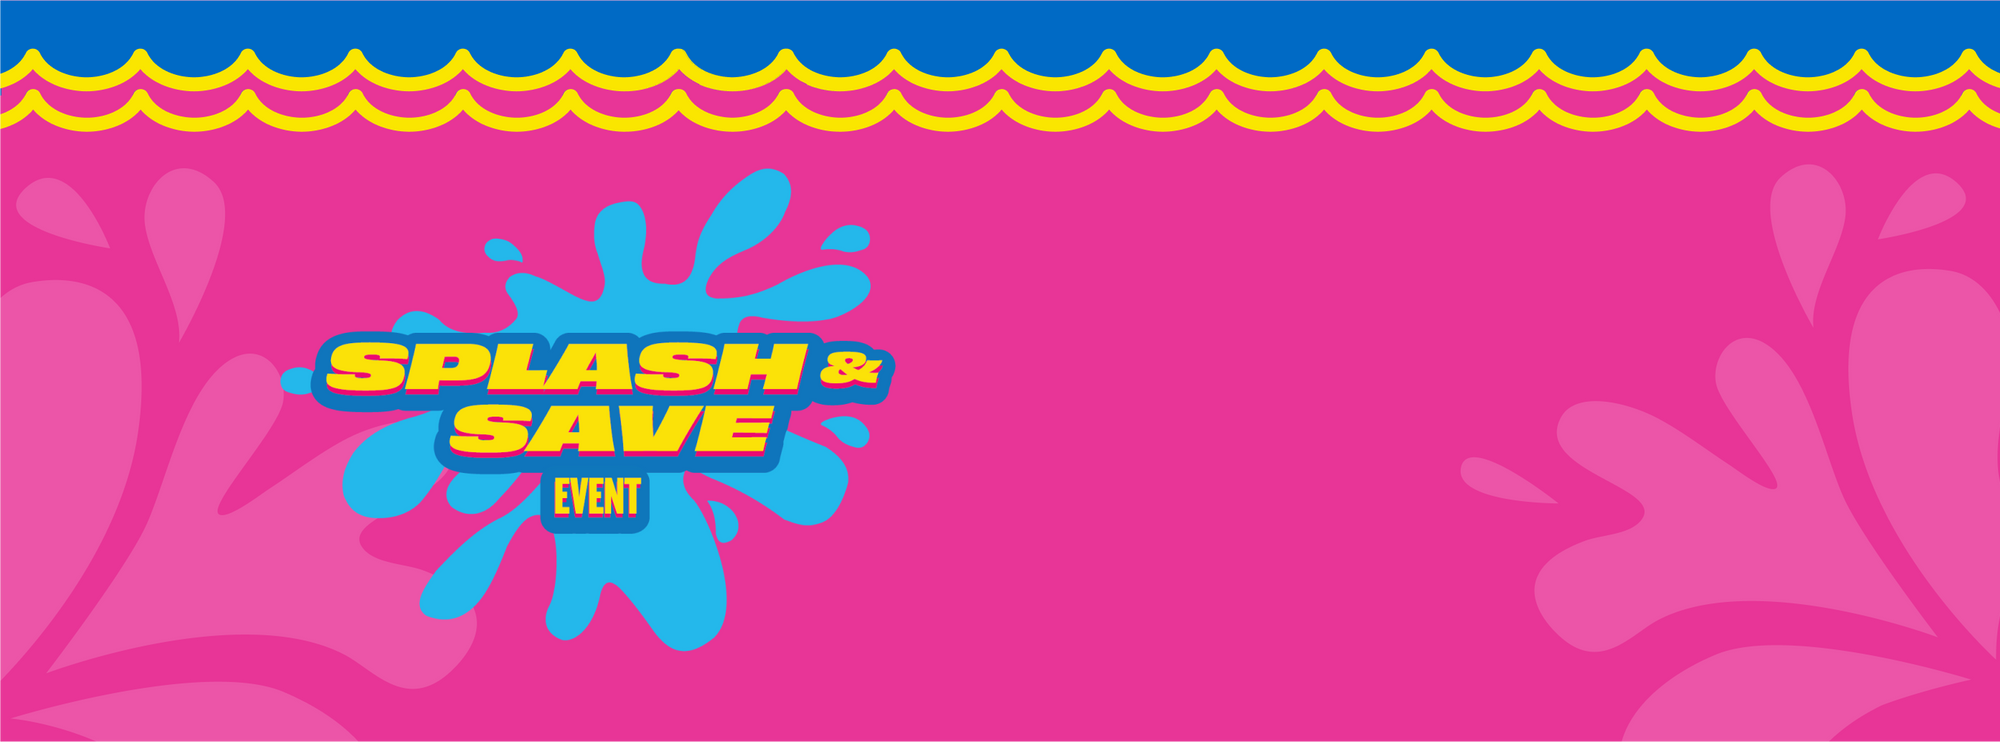 Pink, blue, and yellow Splash & Save Event banner